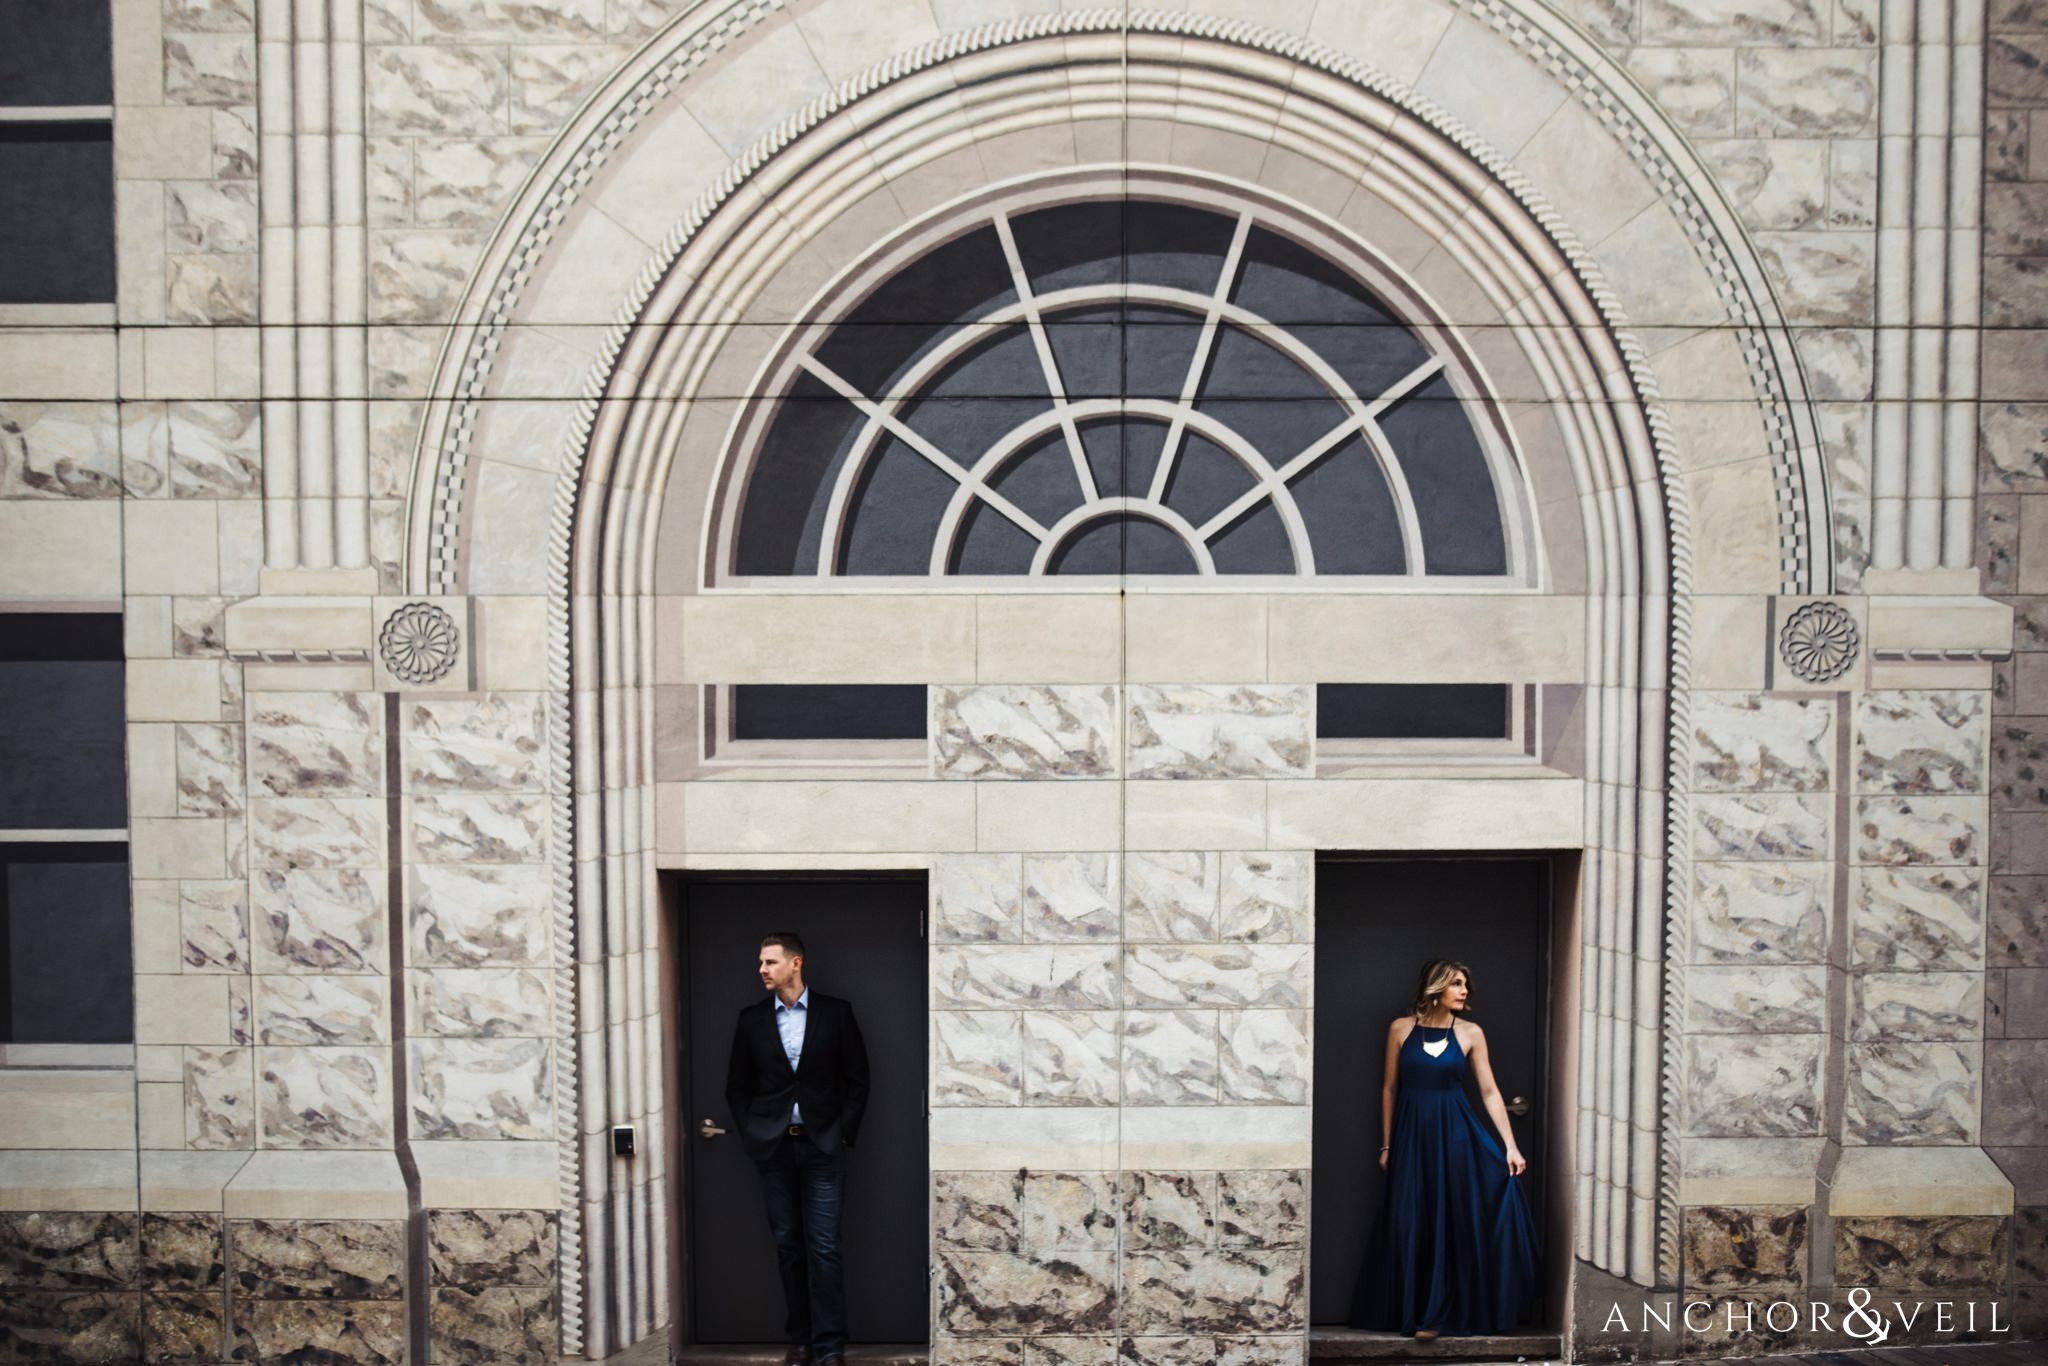 painted wall during their Scenic Washington DC Engagement Session